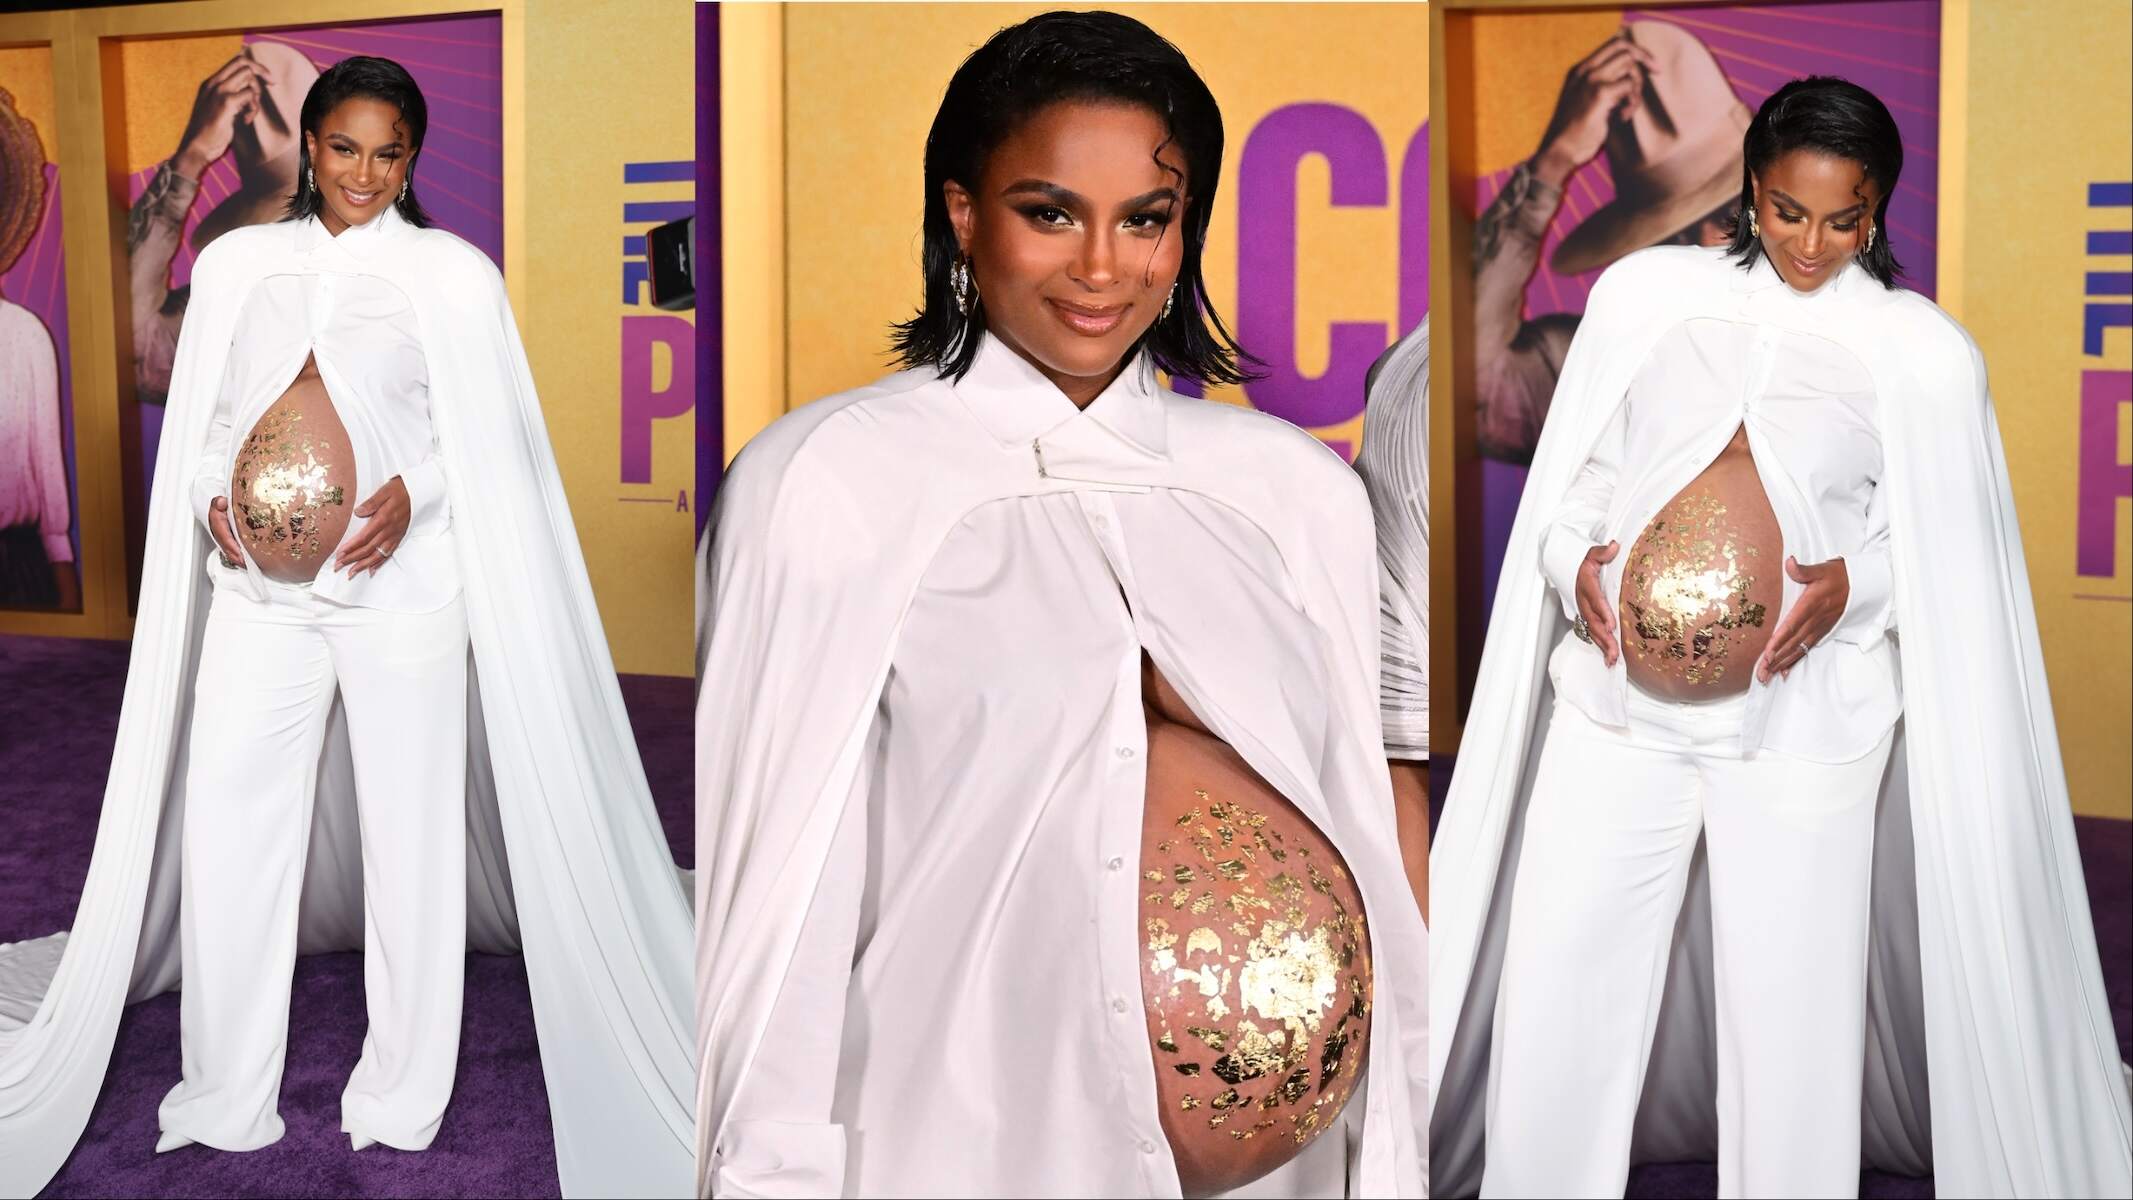 Singer Ciara pose for photos with her baby bump showing through her shirt at the premiere of The Color Purple